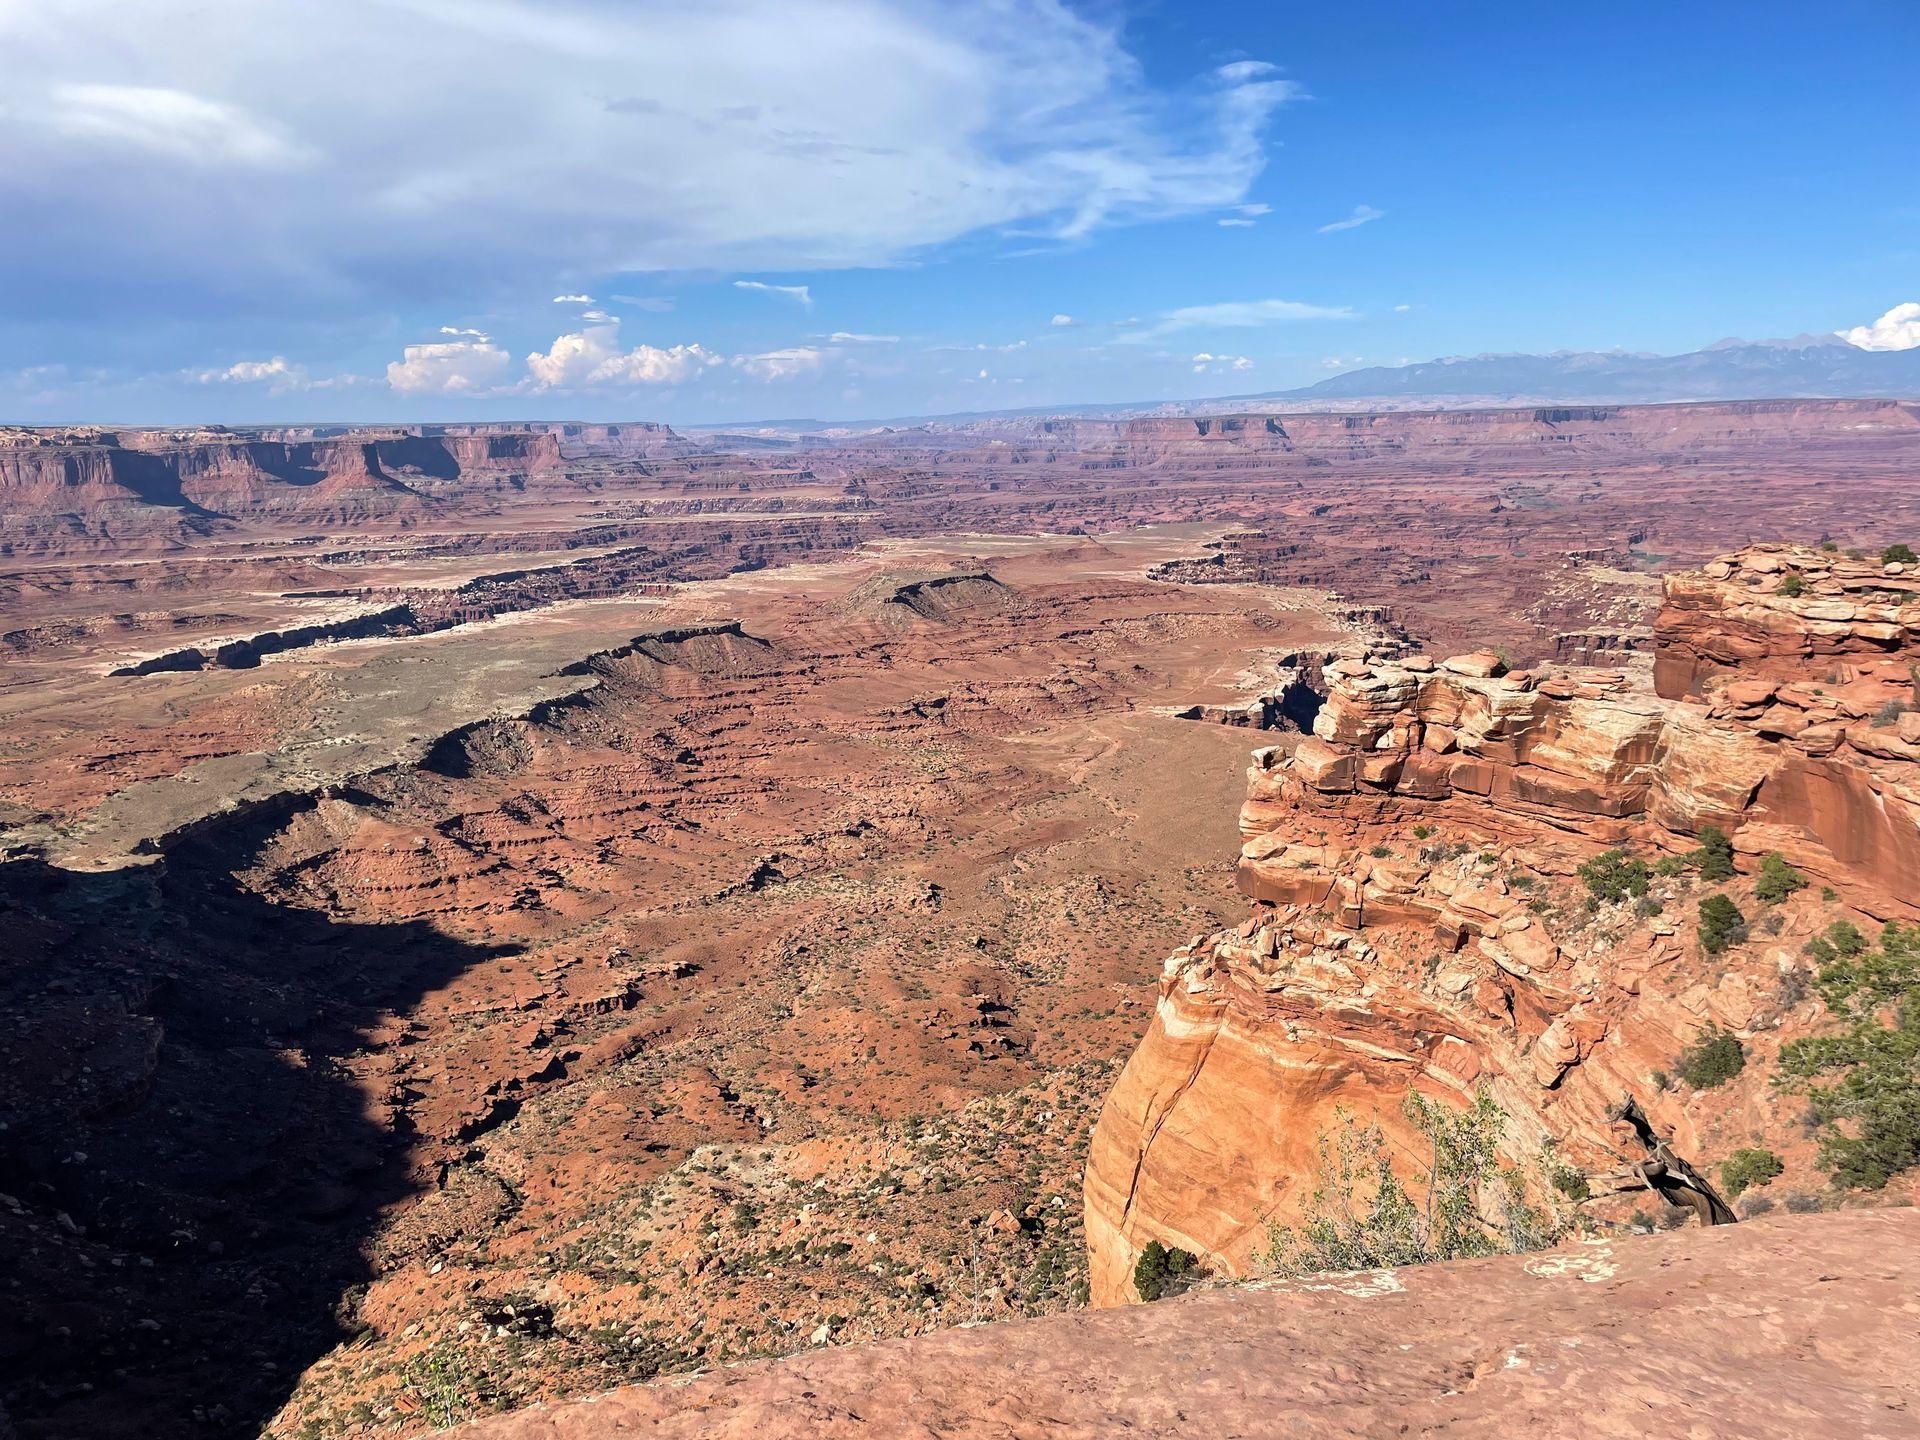 Looking out an expansive canyon from the White Rim Overlook